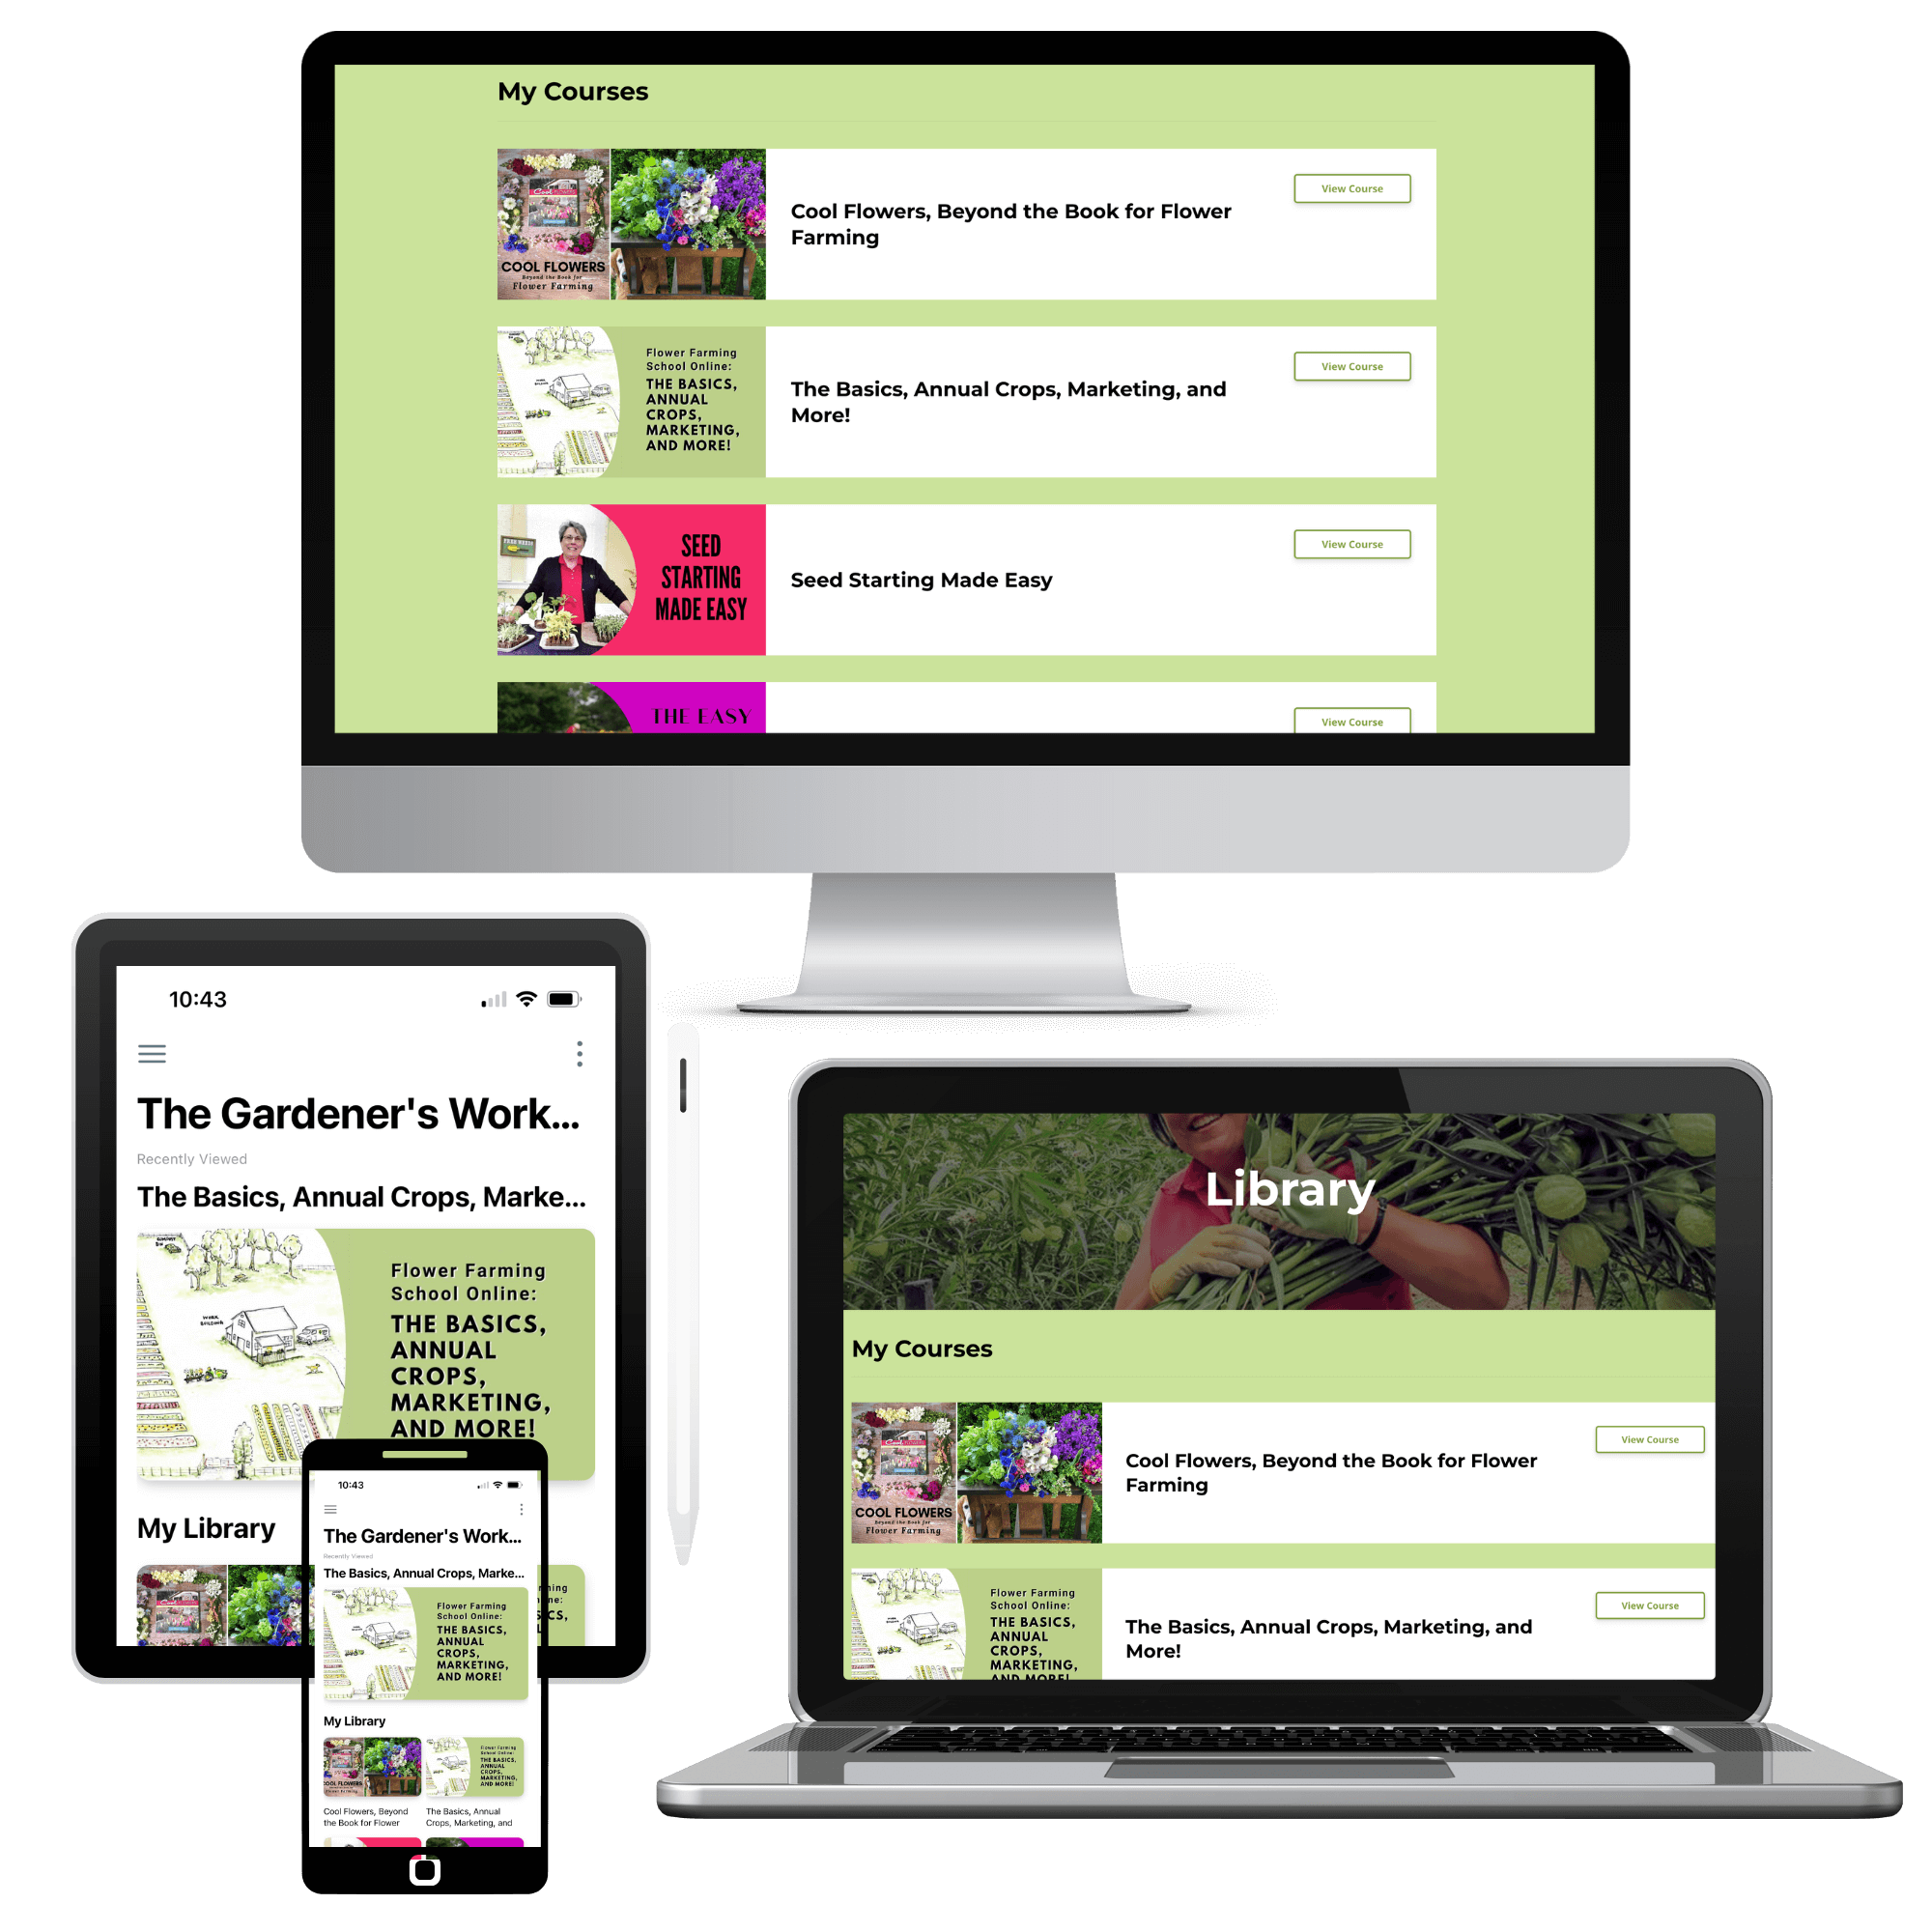 Purchase one of our flower farming schools or mini-courses today to get full access to the content immediately at your fingertips!